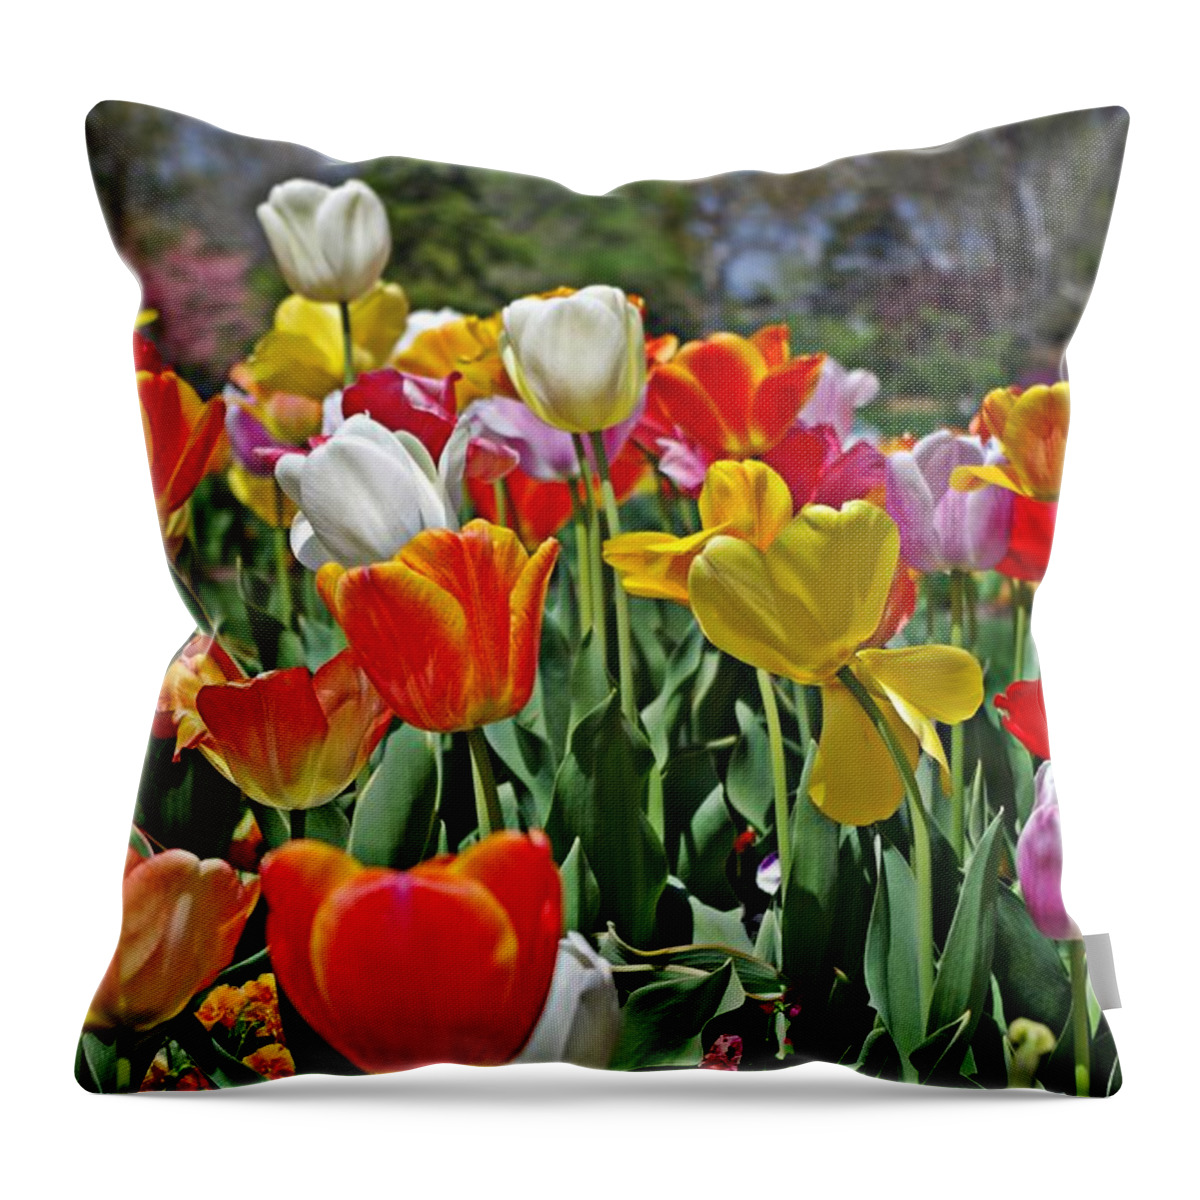 Colorful Tulips Throw Pillow featuring the photograph Colorful Tulips by Sharon Popek